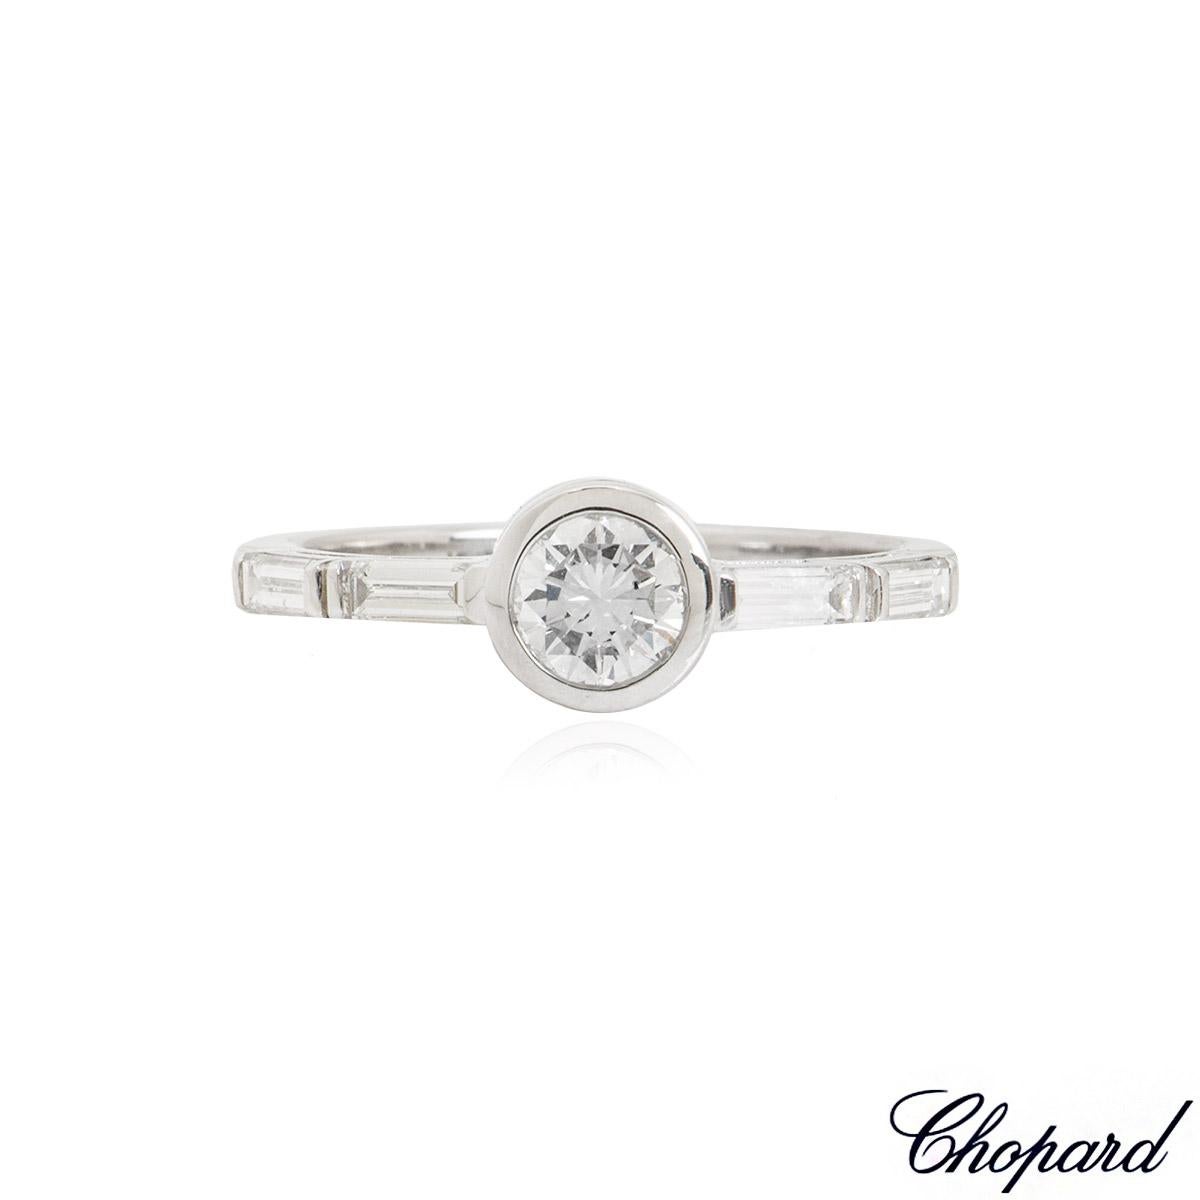 Round Cut Chopard White Gold Diamond Engagement Ring 82/3948-1110 For Sale